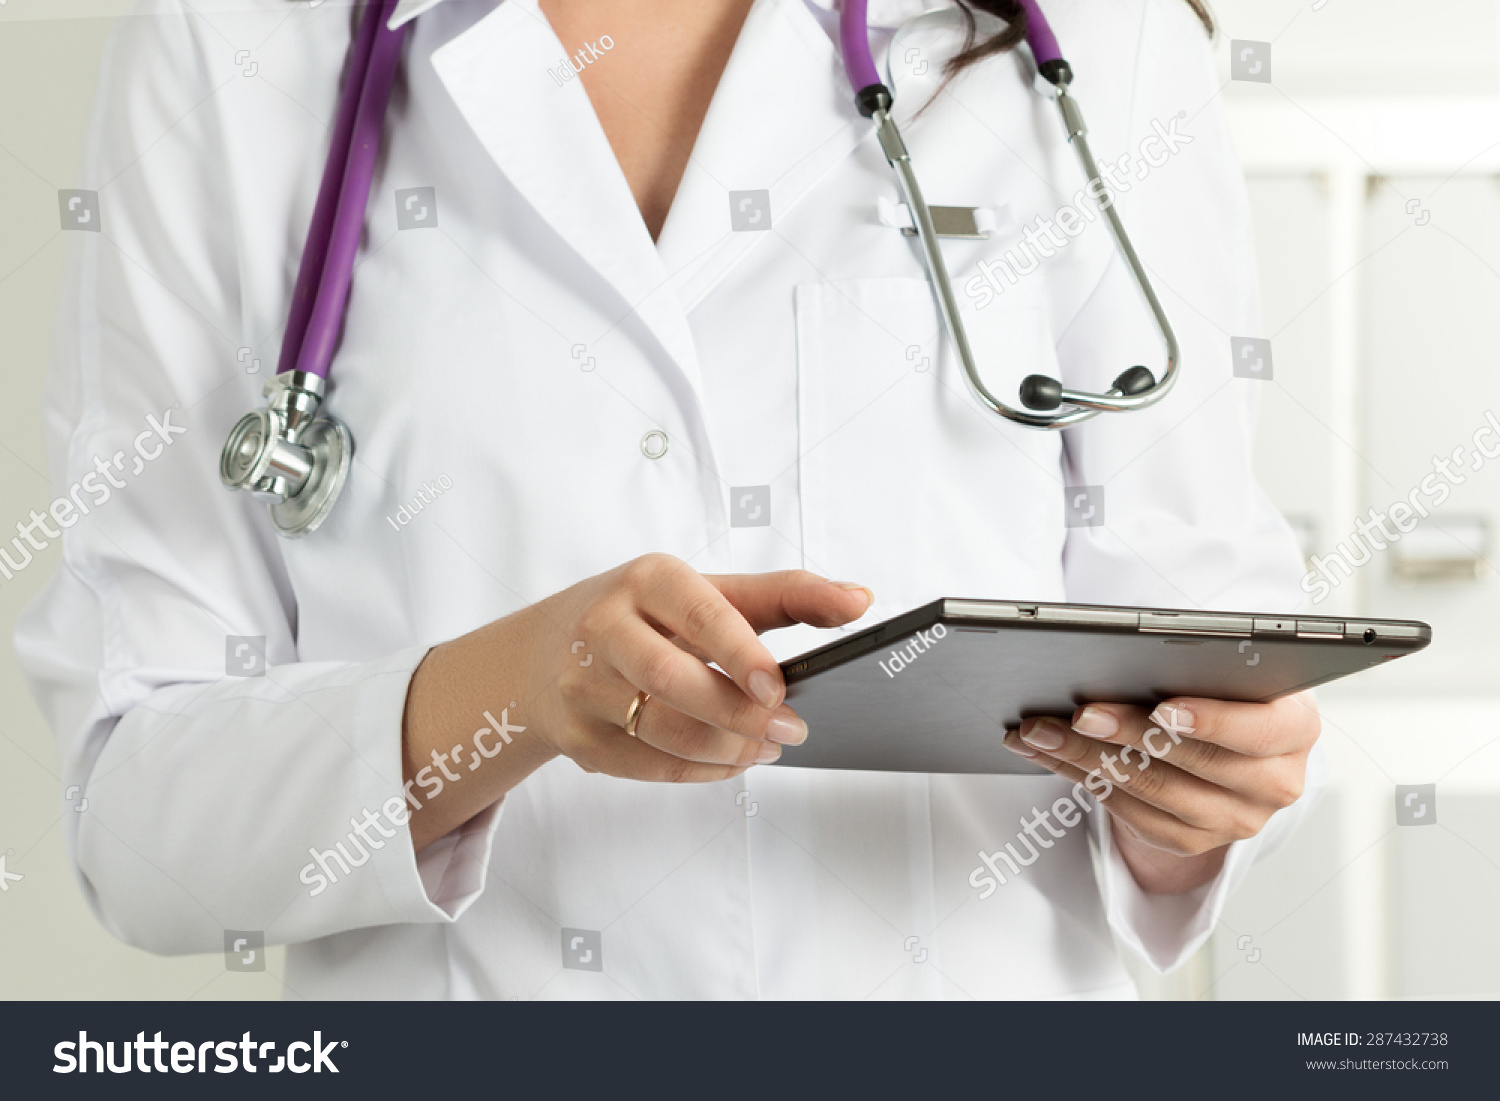 Female Doctor Holding Tablet PC. Doctor's hands close-up. Medical service and health care concept. #287432738